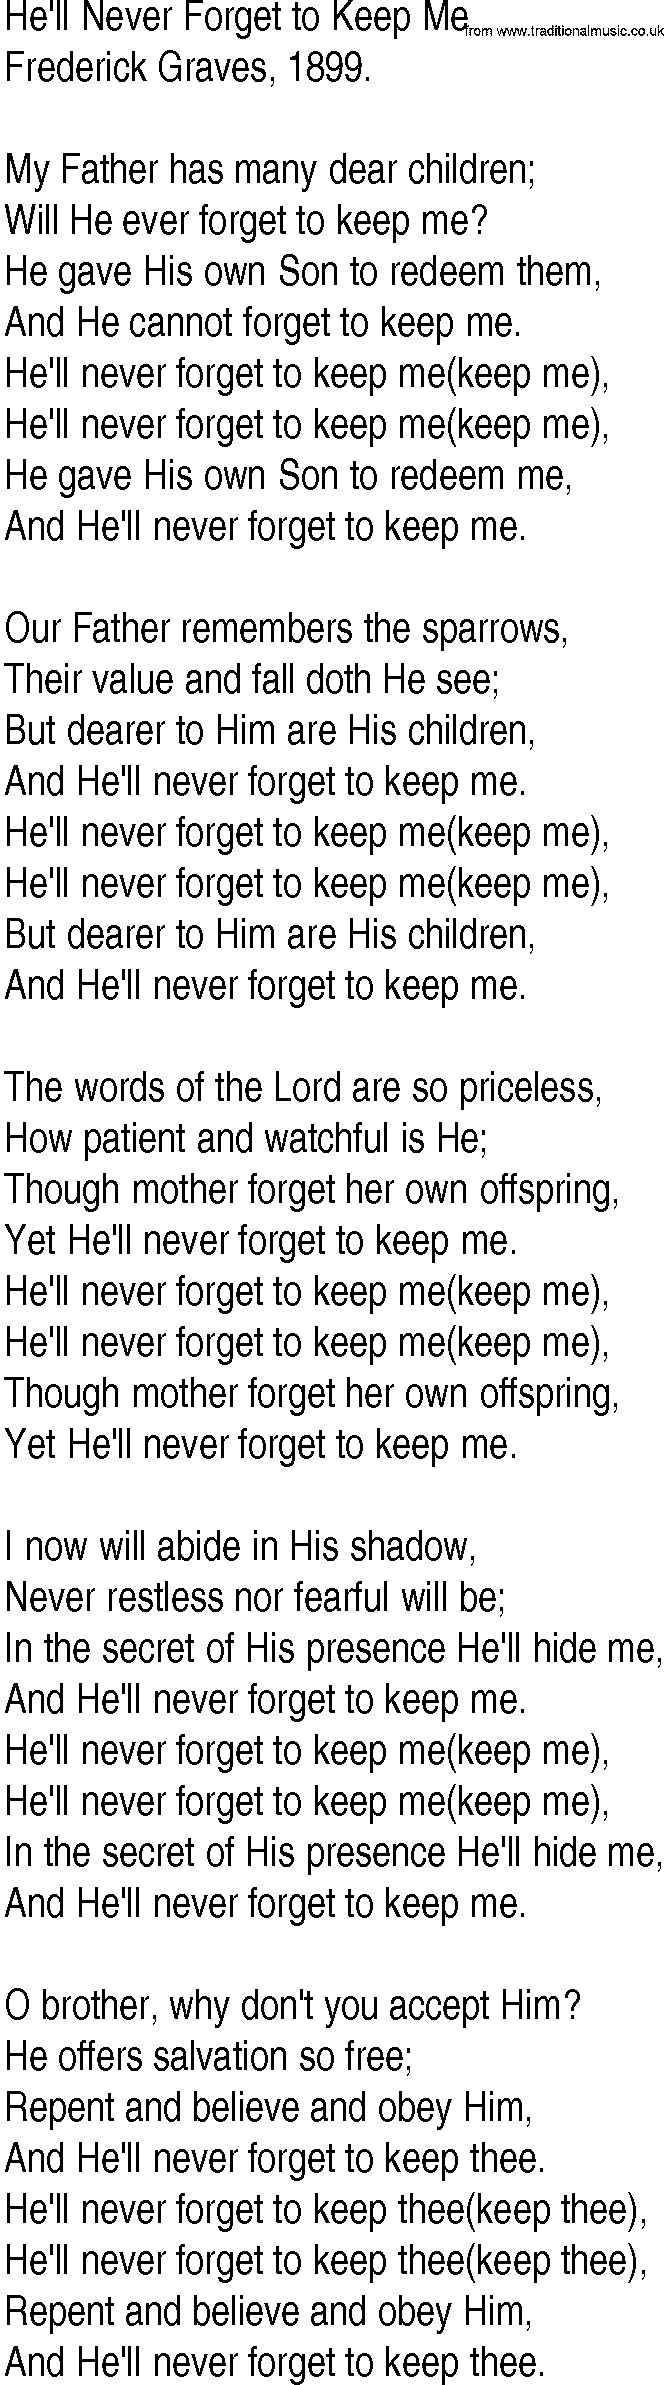 Hymn and Gospel Song: He'll Never Forget to Keep Me by Frederick Graves lyrics